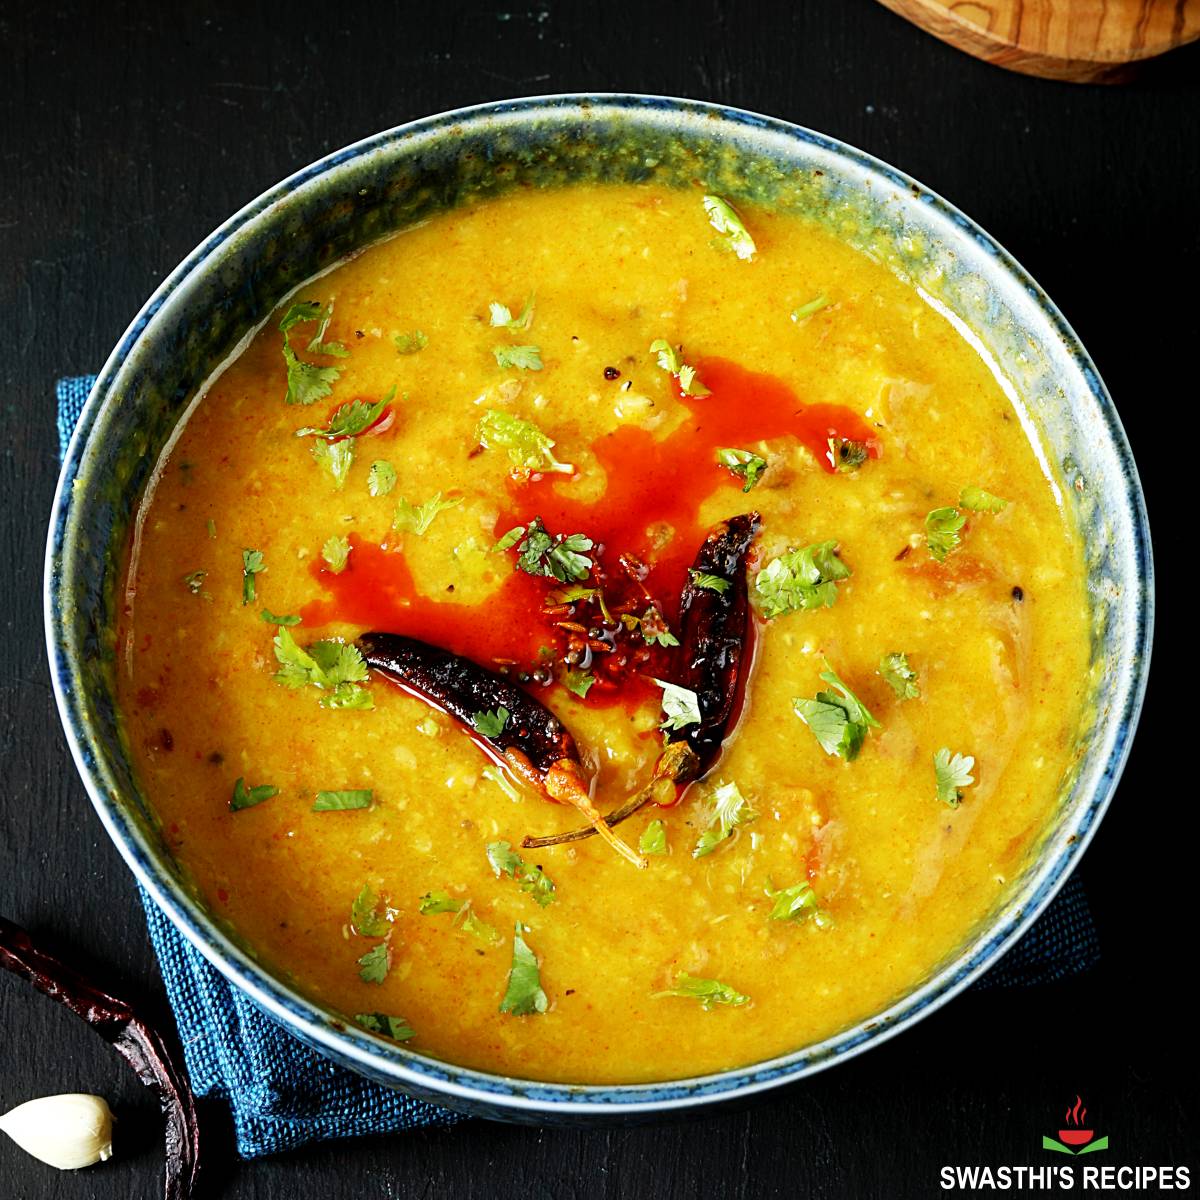 Masoor Dal Recipe made with red lentils and spices